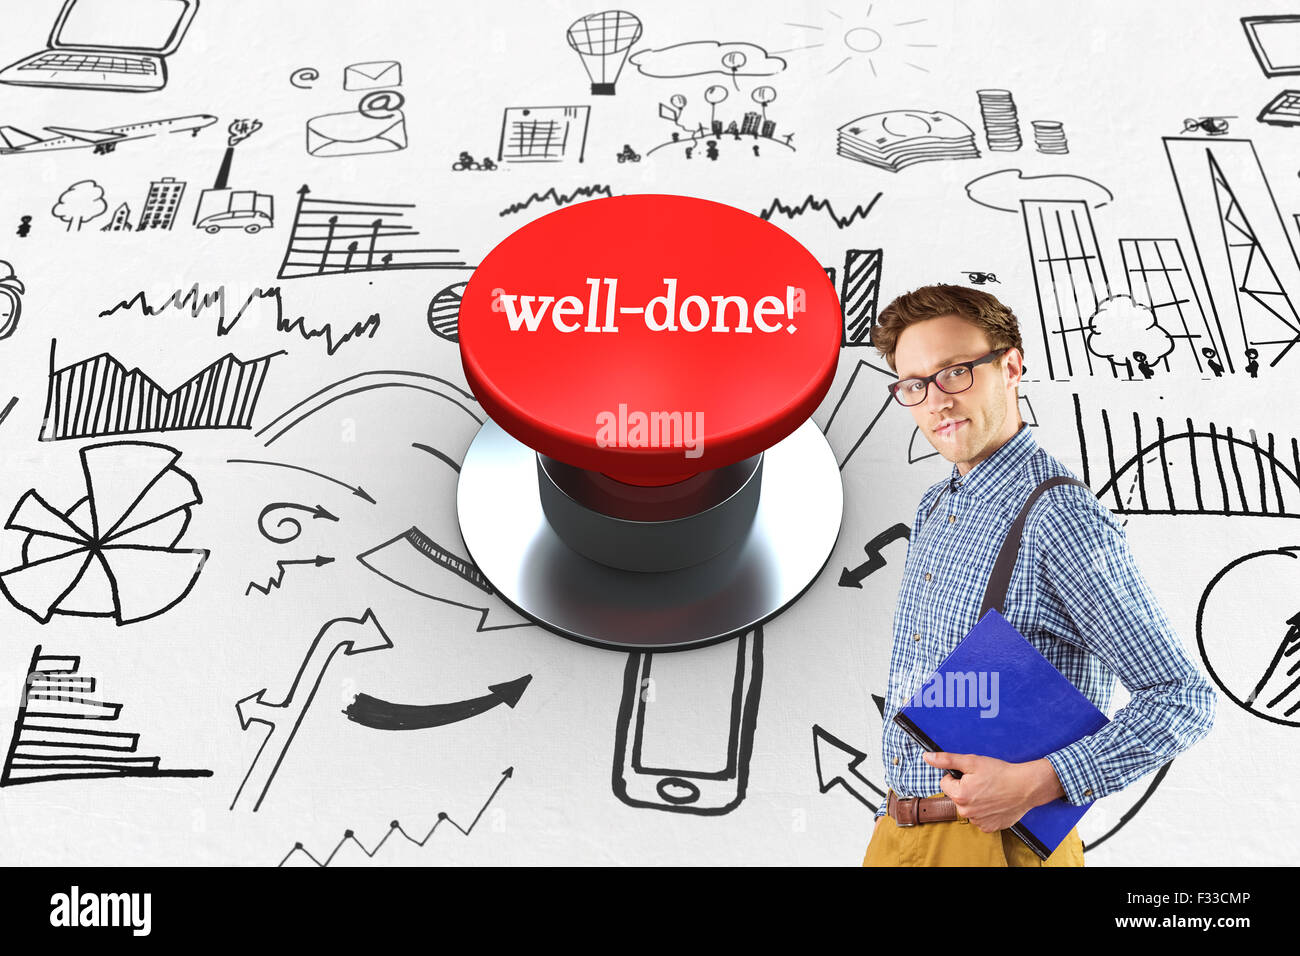 Well-done! against digitally generated red push button Stock Photo